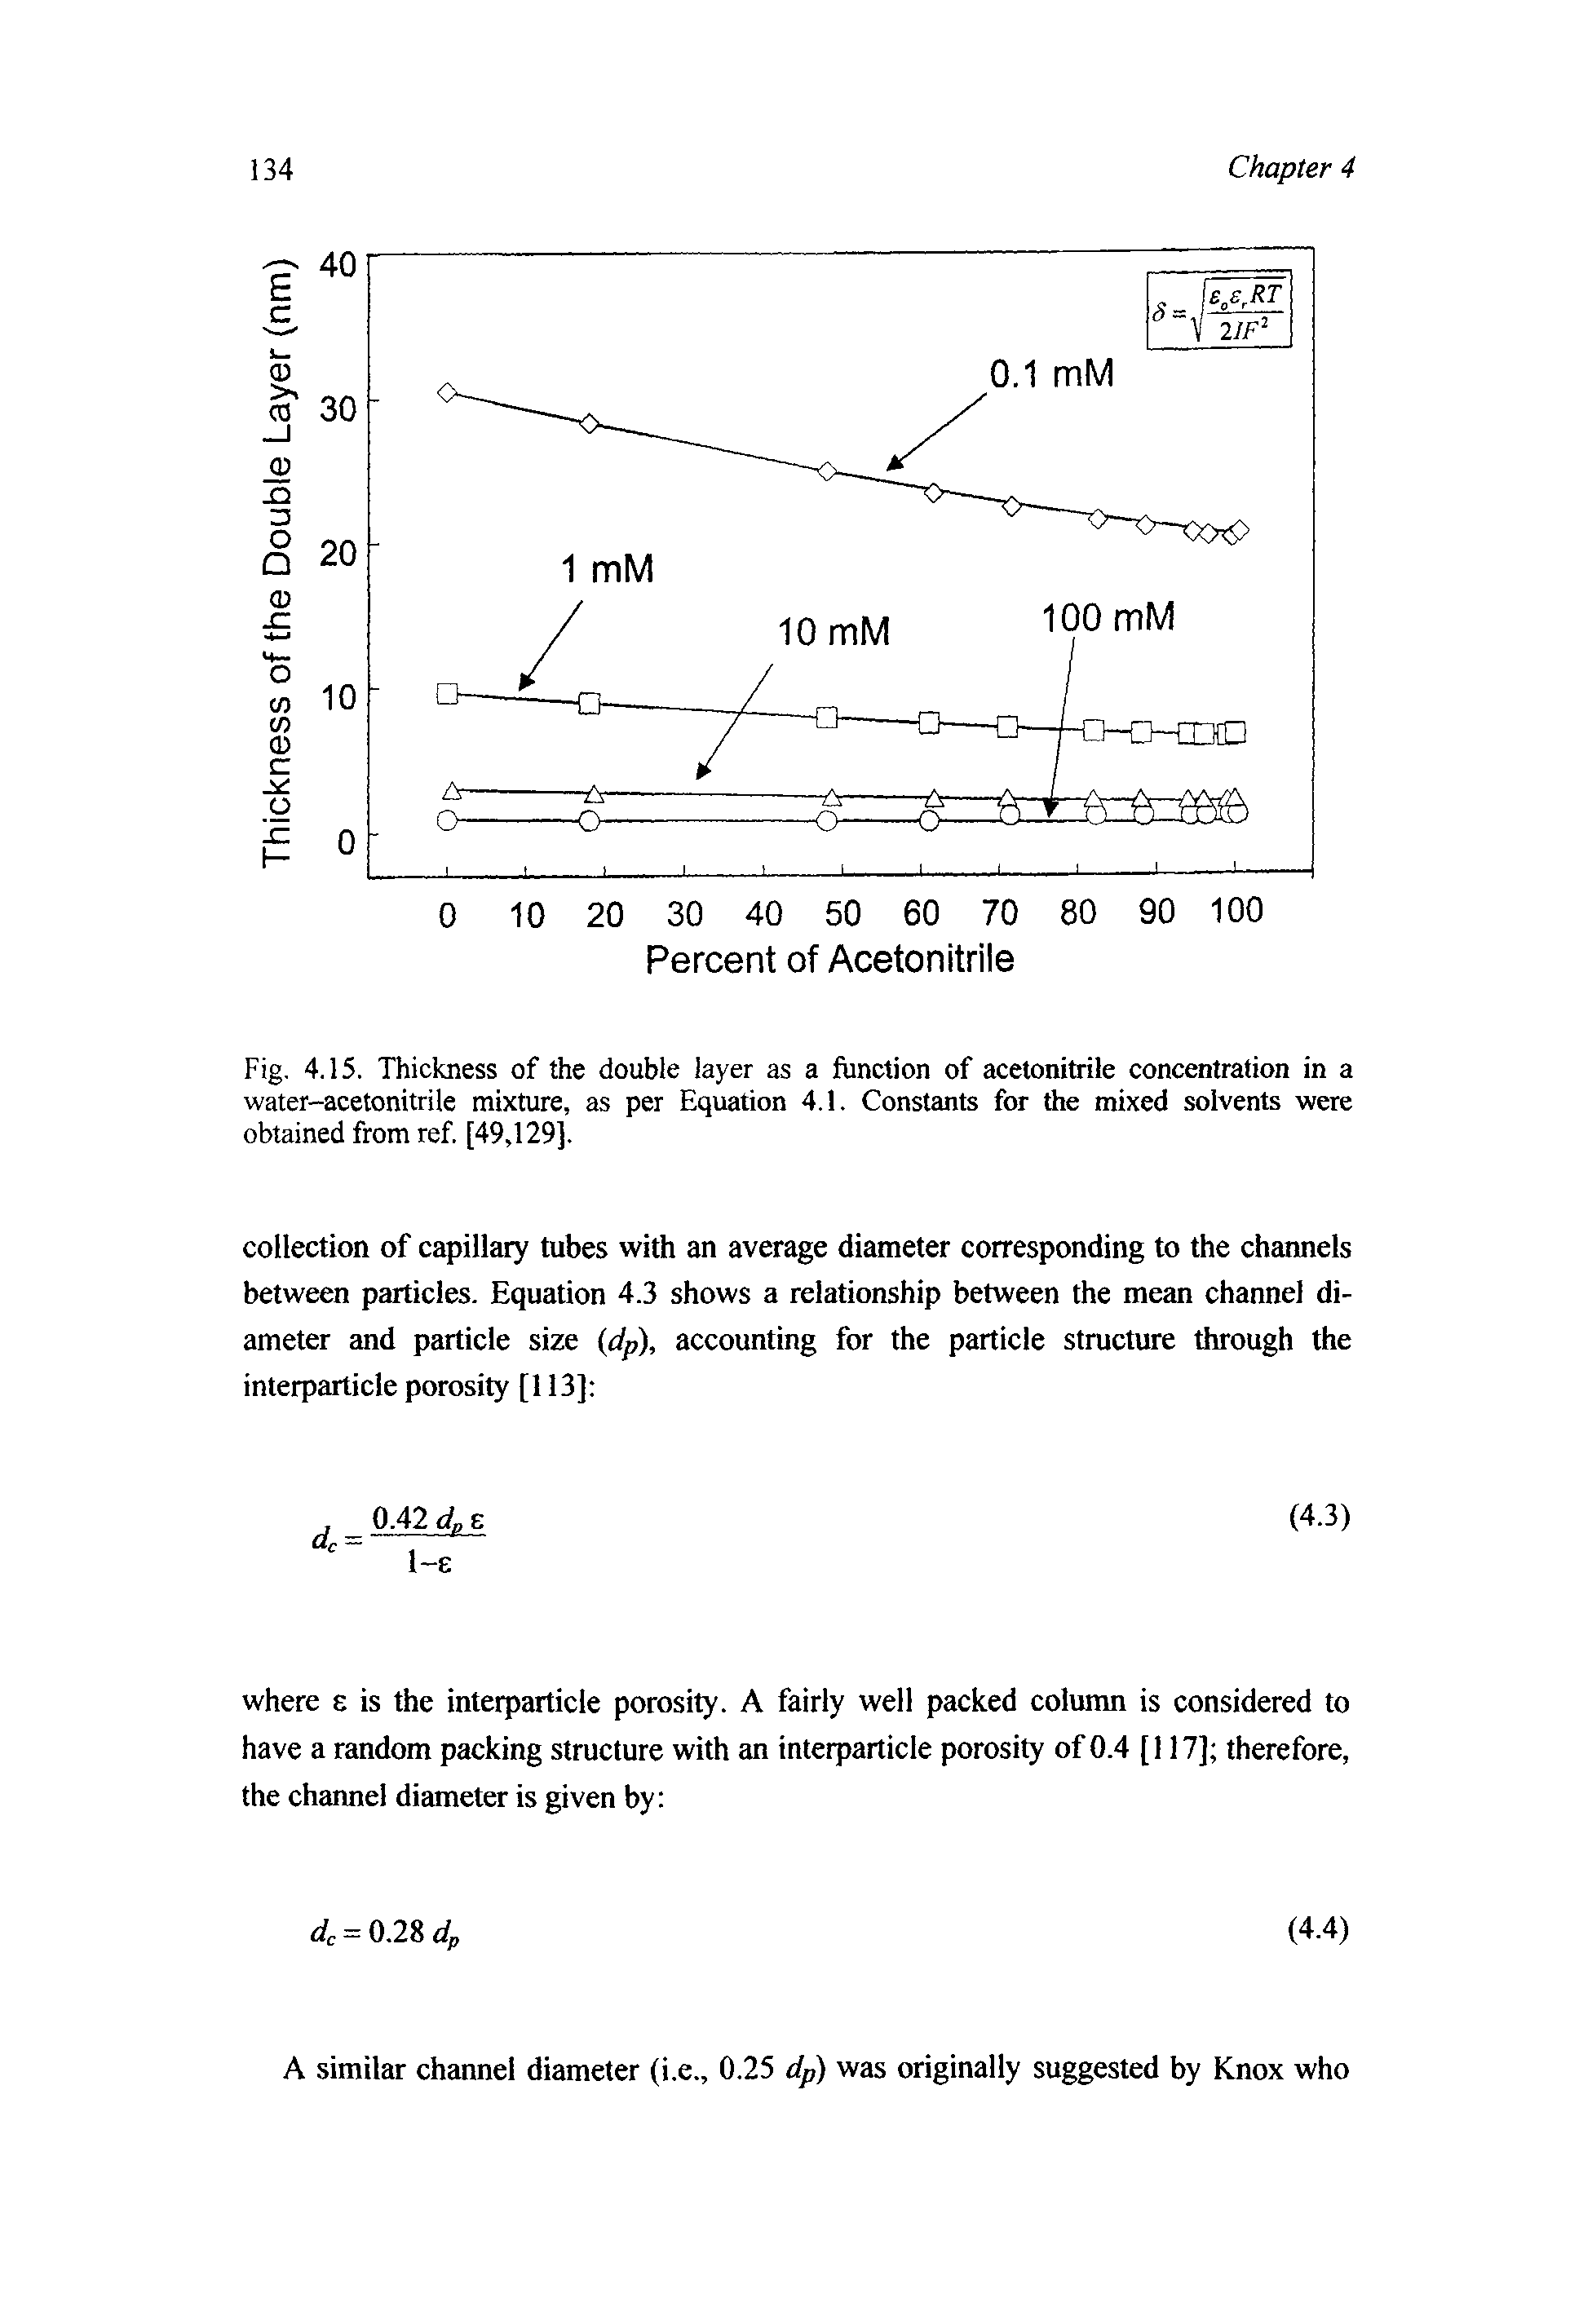 Fig. 4.15. Thickness of the double layer as a function of acetonitrile concentration in a water-acetonitrile mixture, as per Equation 4.1. Constants for the mixed solvents were obtained from ref. [49,129].